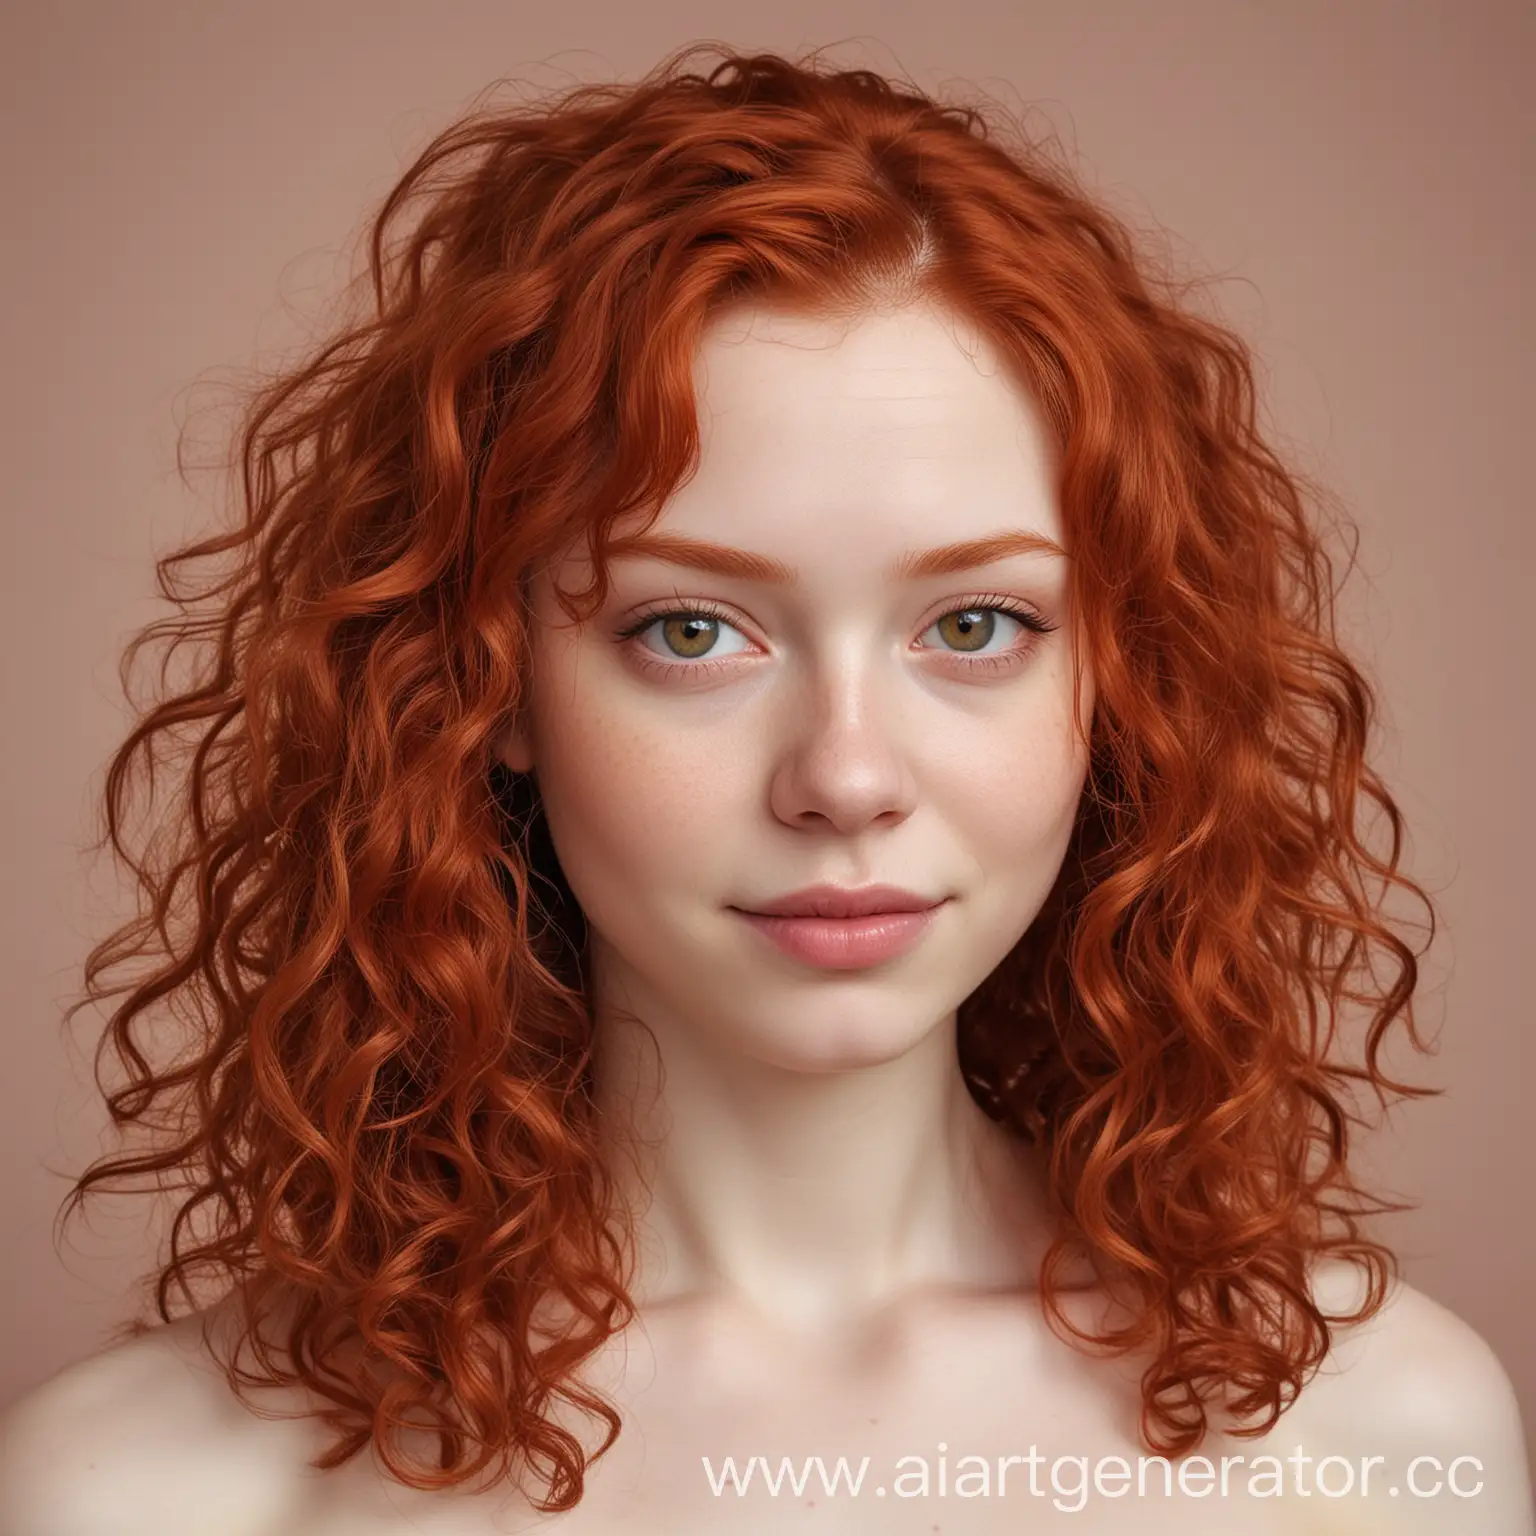 Portrait-of-a-Friendly-Teenage-Girl-with-Curly-Red-Hair-and-Ocular-Albinism